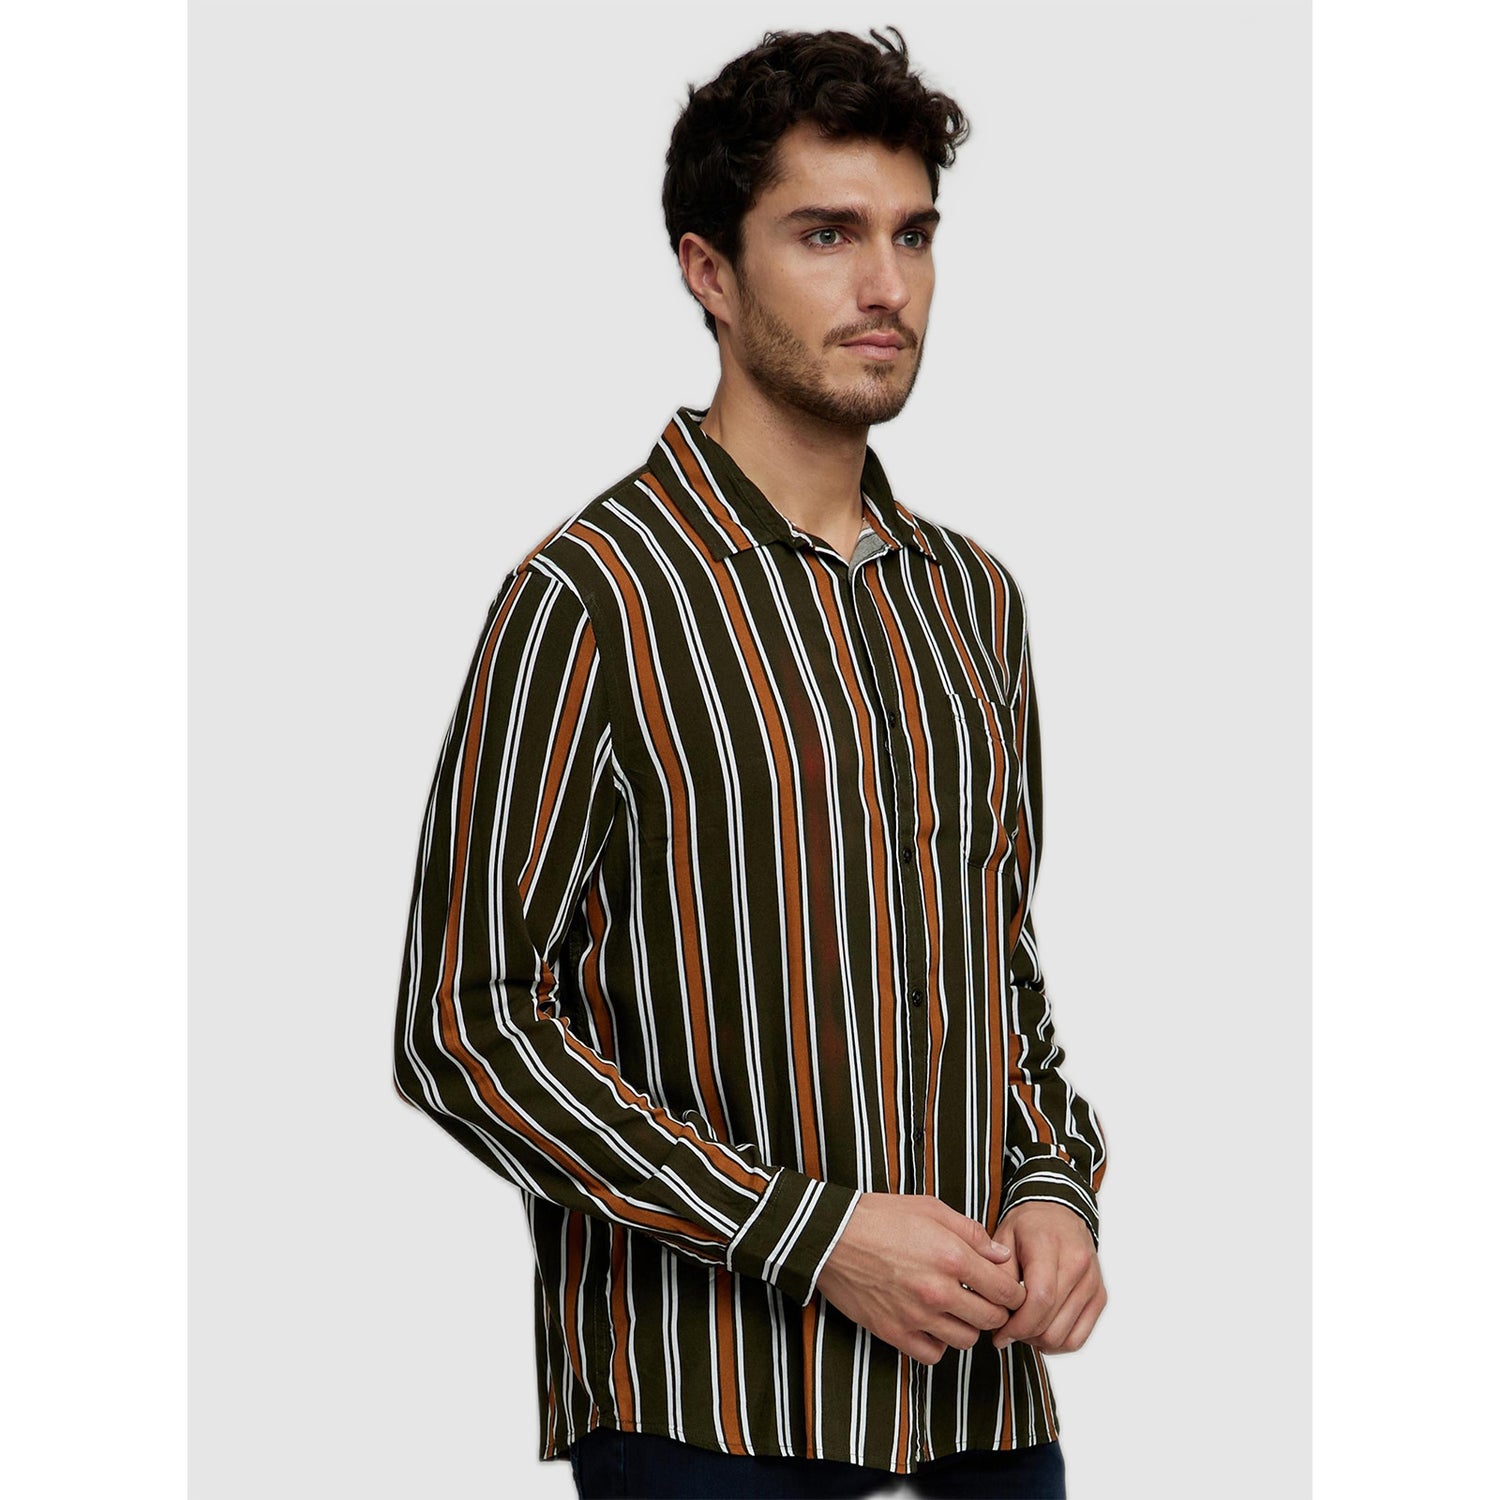 Olive Green Striped Long Sleeves Classic Casual Shirt (CAVISLINE)